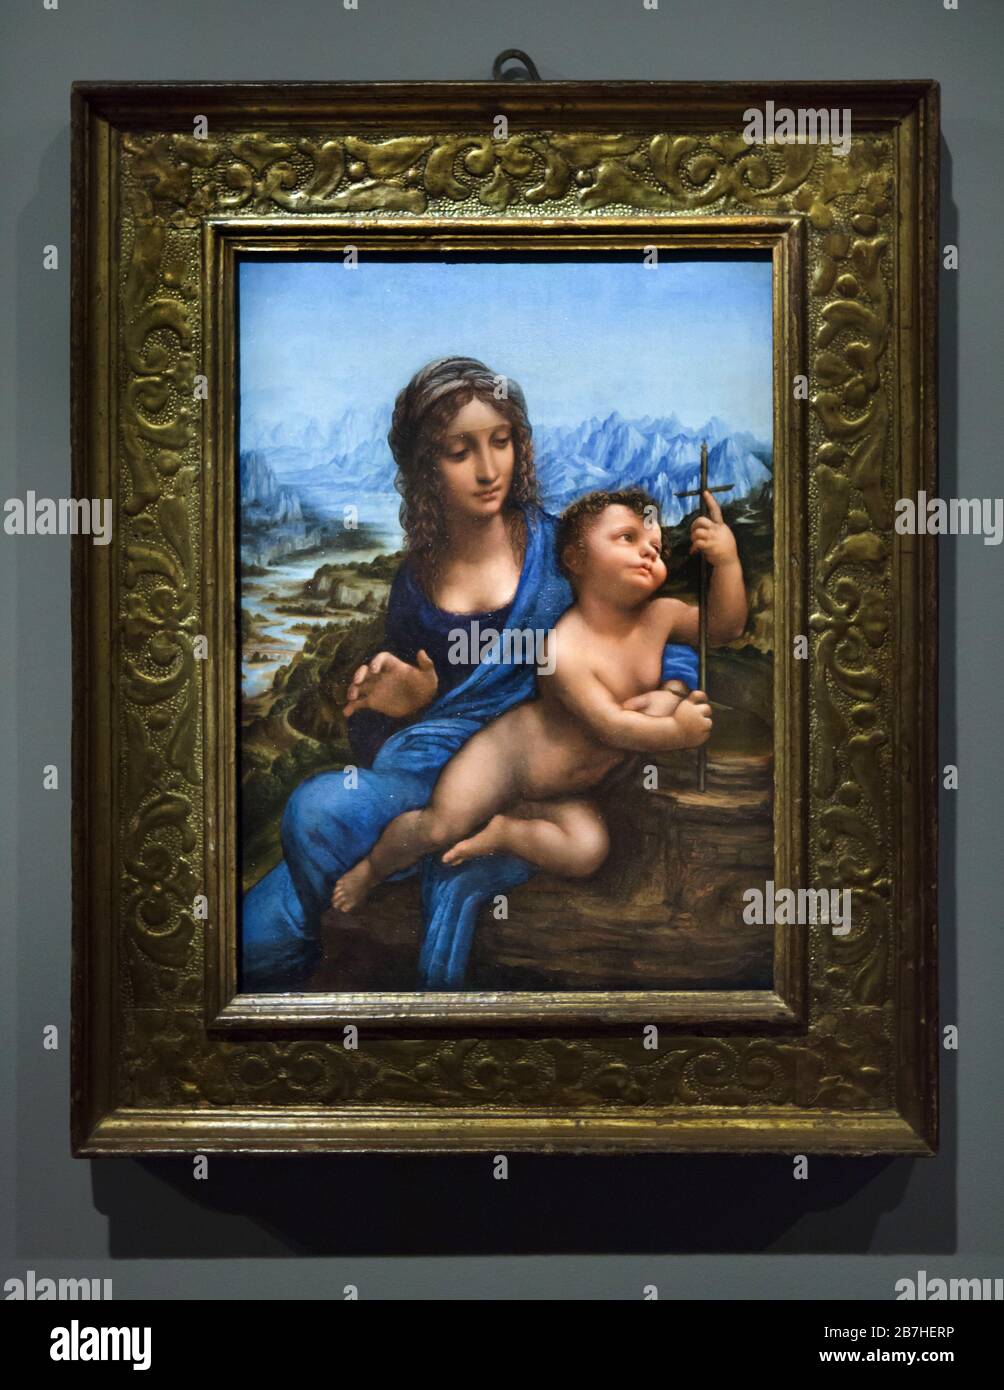 Painting 'Landsdowne Madonna' also known as 'Madonna of the Yarnwinder' by Italian Renaissance painter Leonardo da Vinci (1501-1510) on display at his exhibition in the Louvre Museum in Paris, France. The exhibition marking the 500th anniversary of Leonardo's death runs till 24 February 2020. Stock Photo